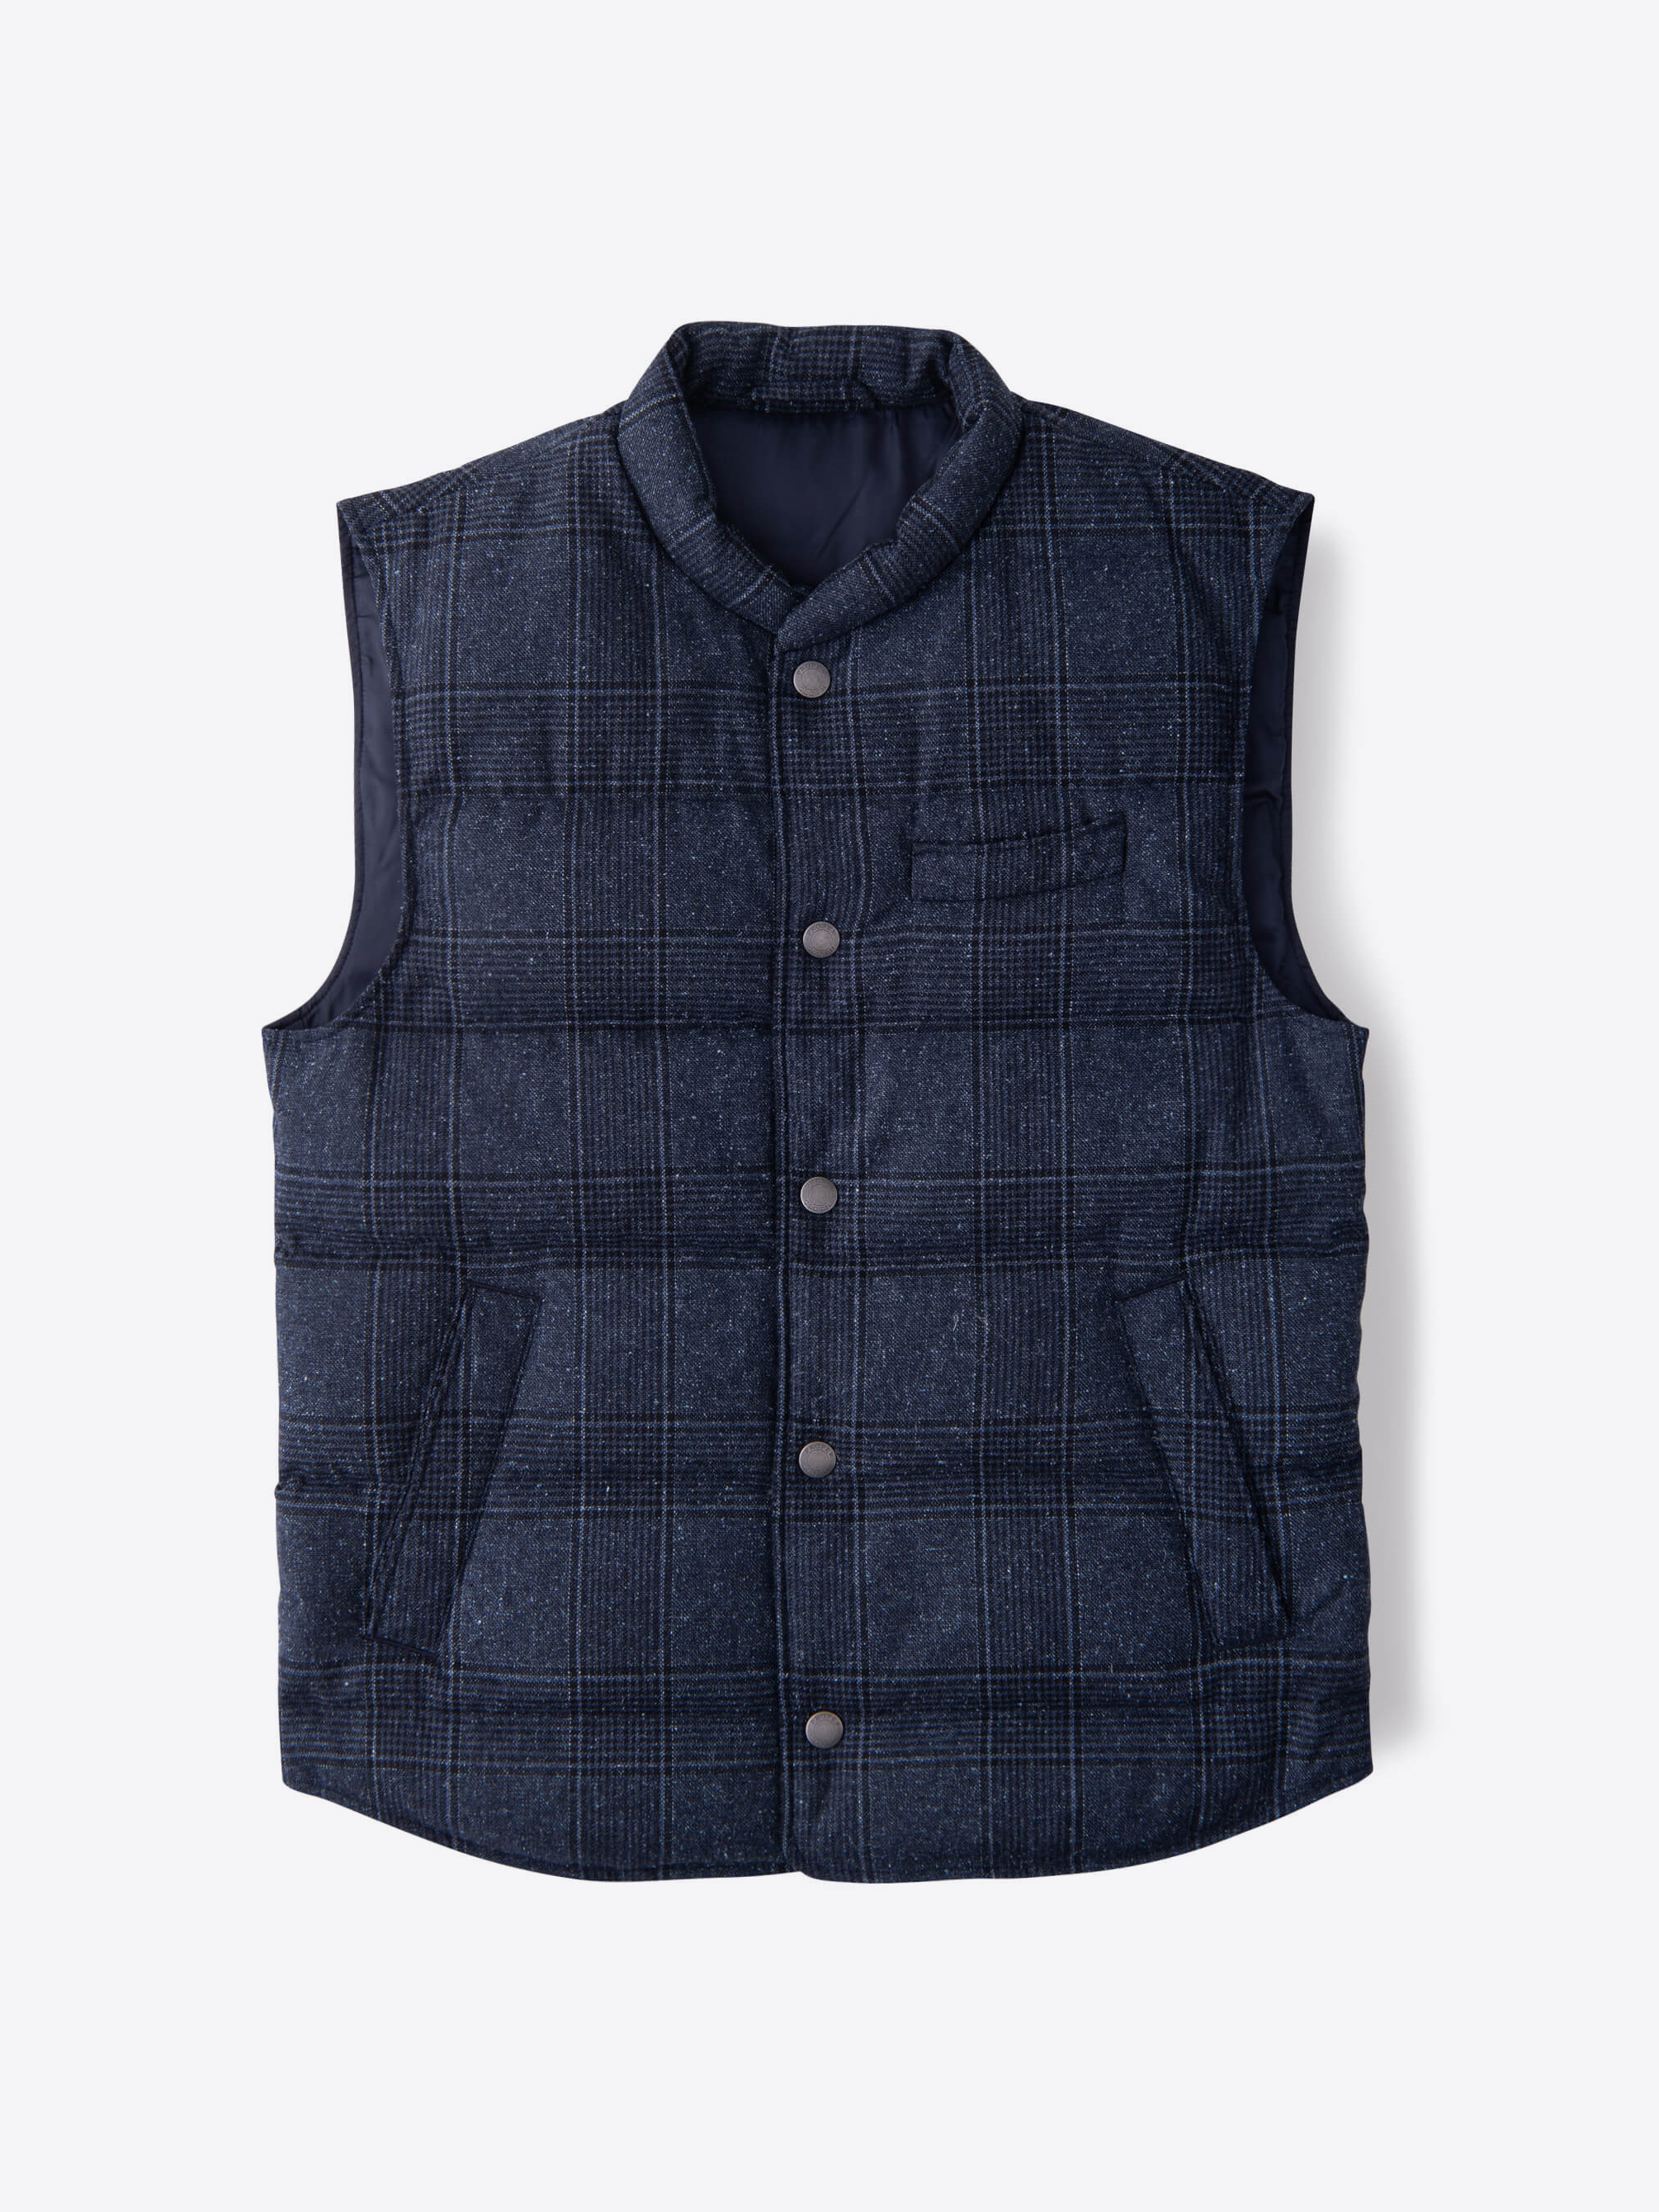 Zoom Image of Cortina Navy Plaid Donegal Wool Snap Vest